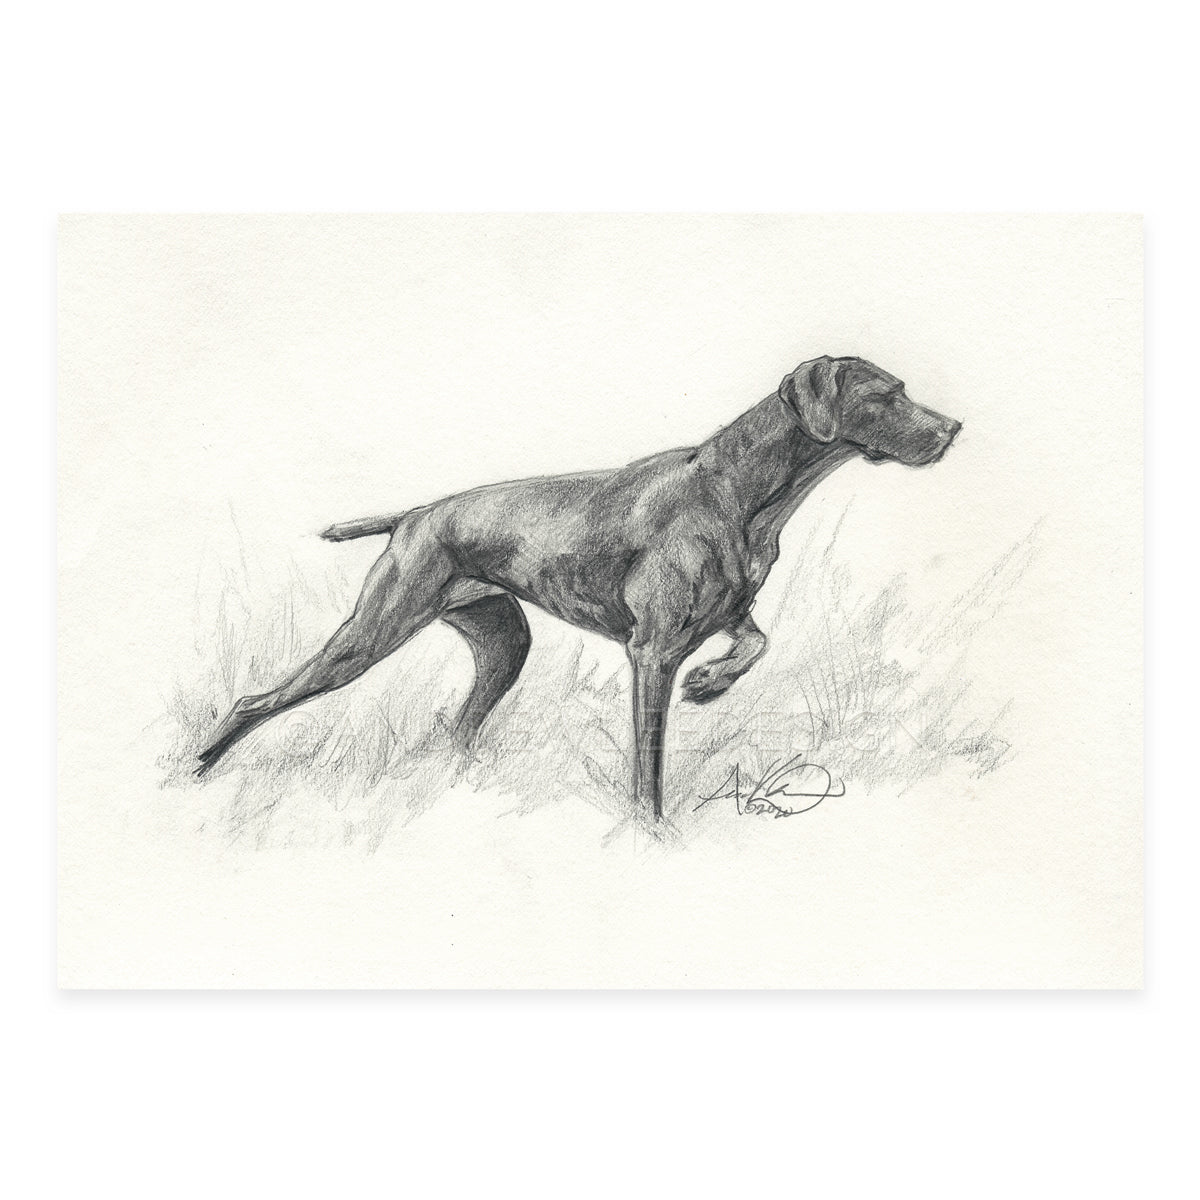 German Shorthaired Pointer in Pencil, 5x7" Print